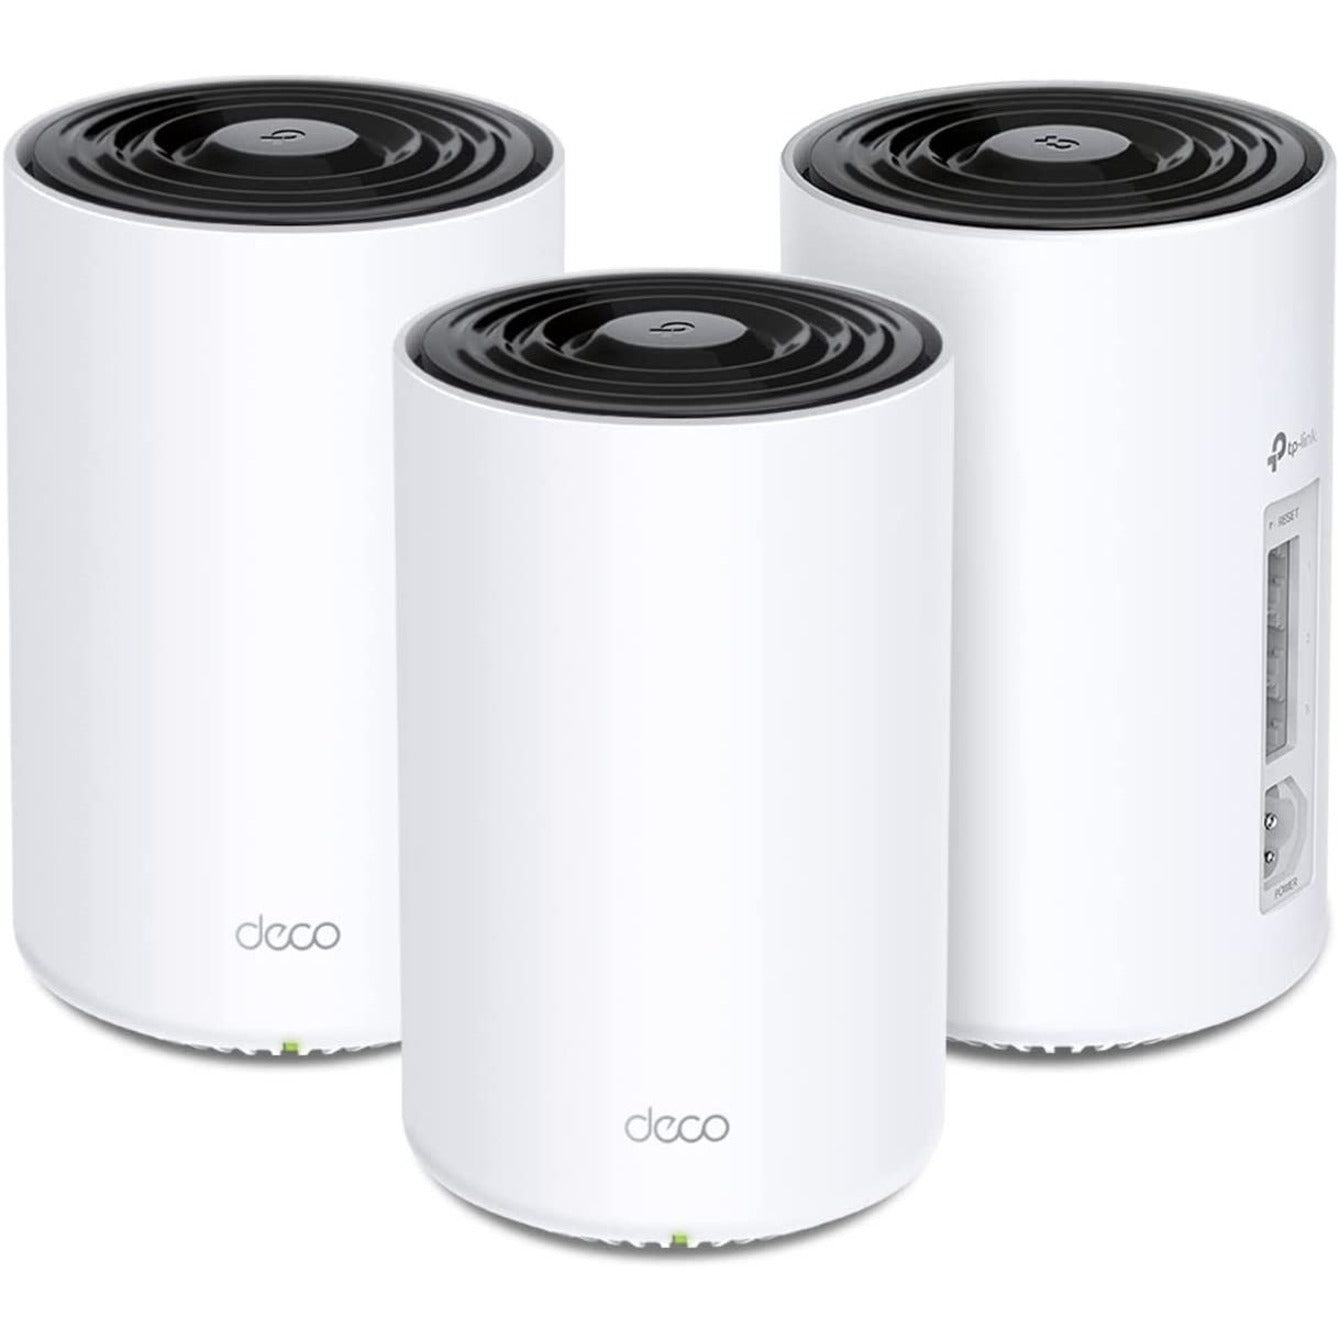 TP-Link (DECO PX50(3-PACK)) Wireless Router